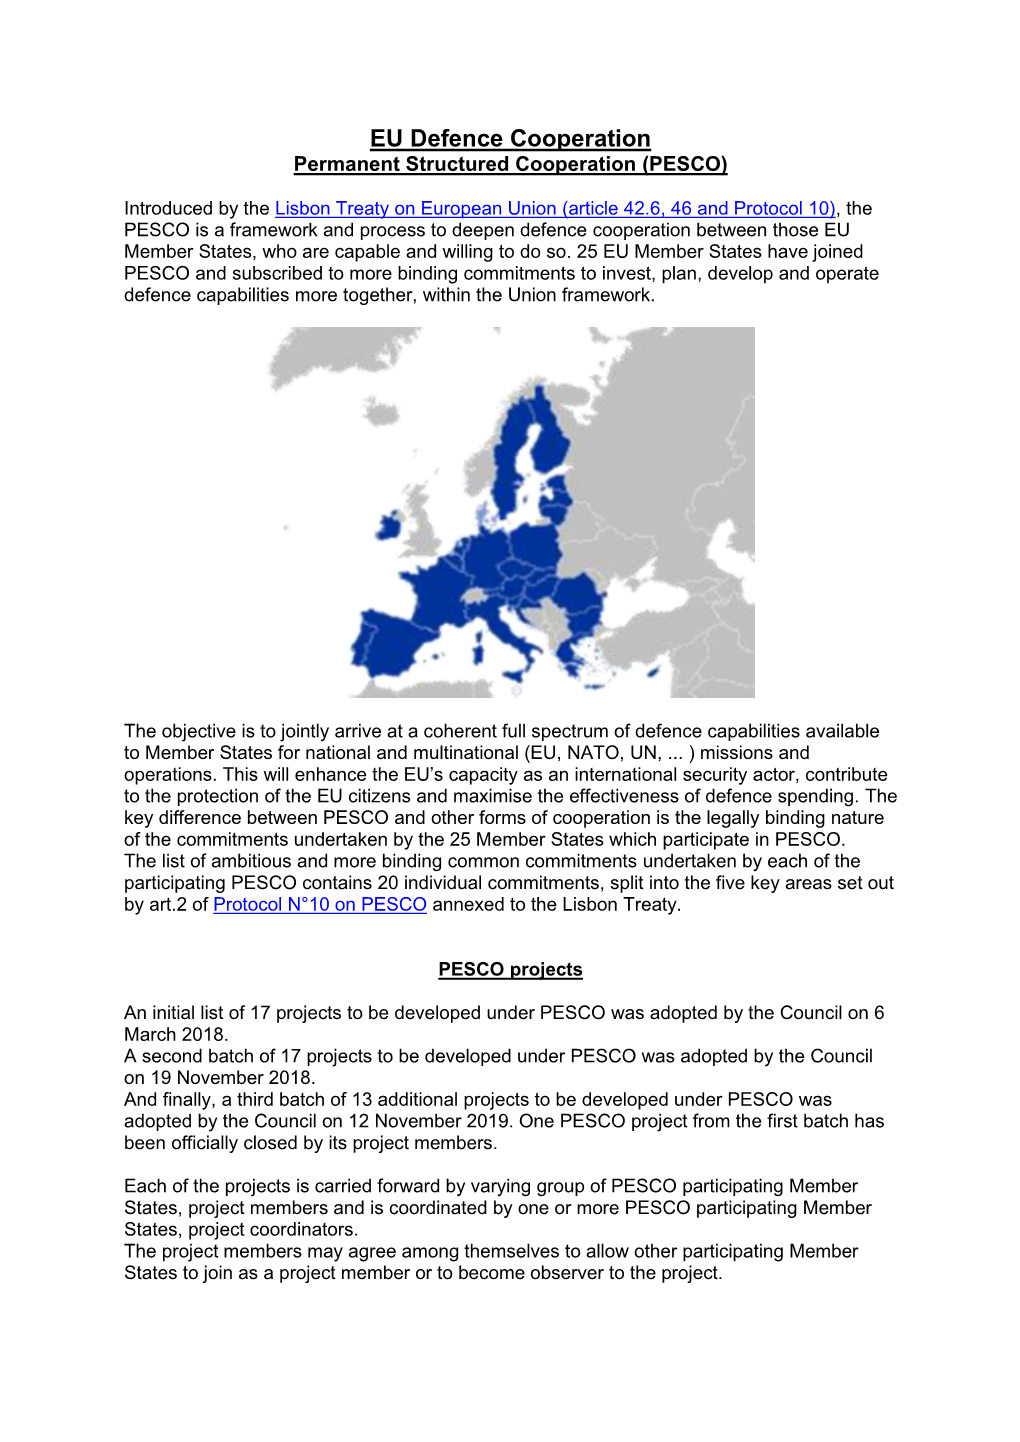 EU Defence Cooperation Permanent Structured Cooperation (PESCO)